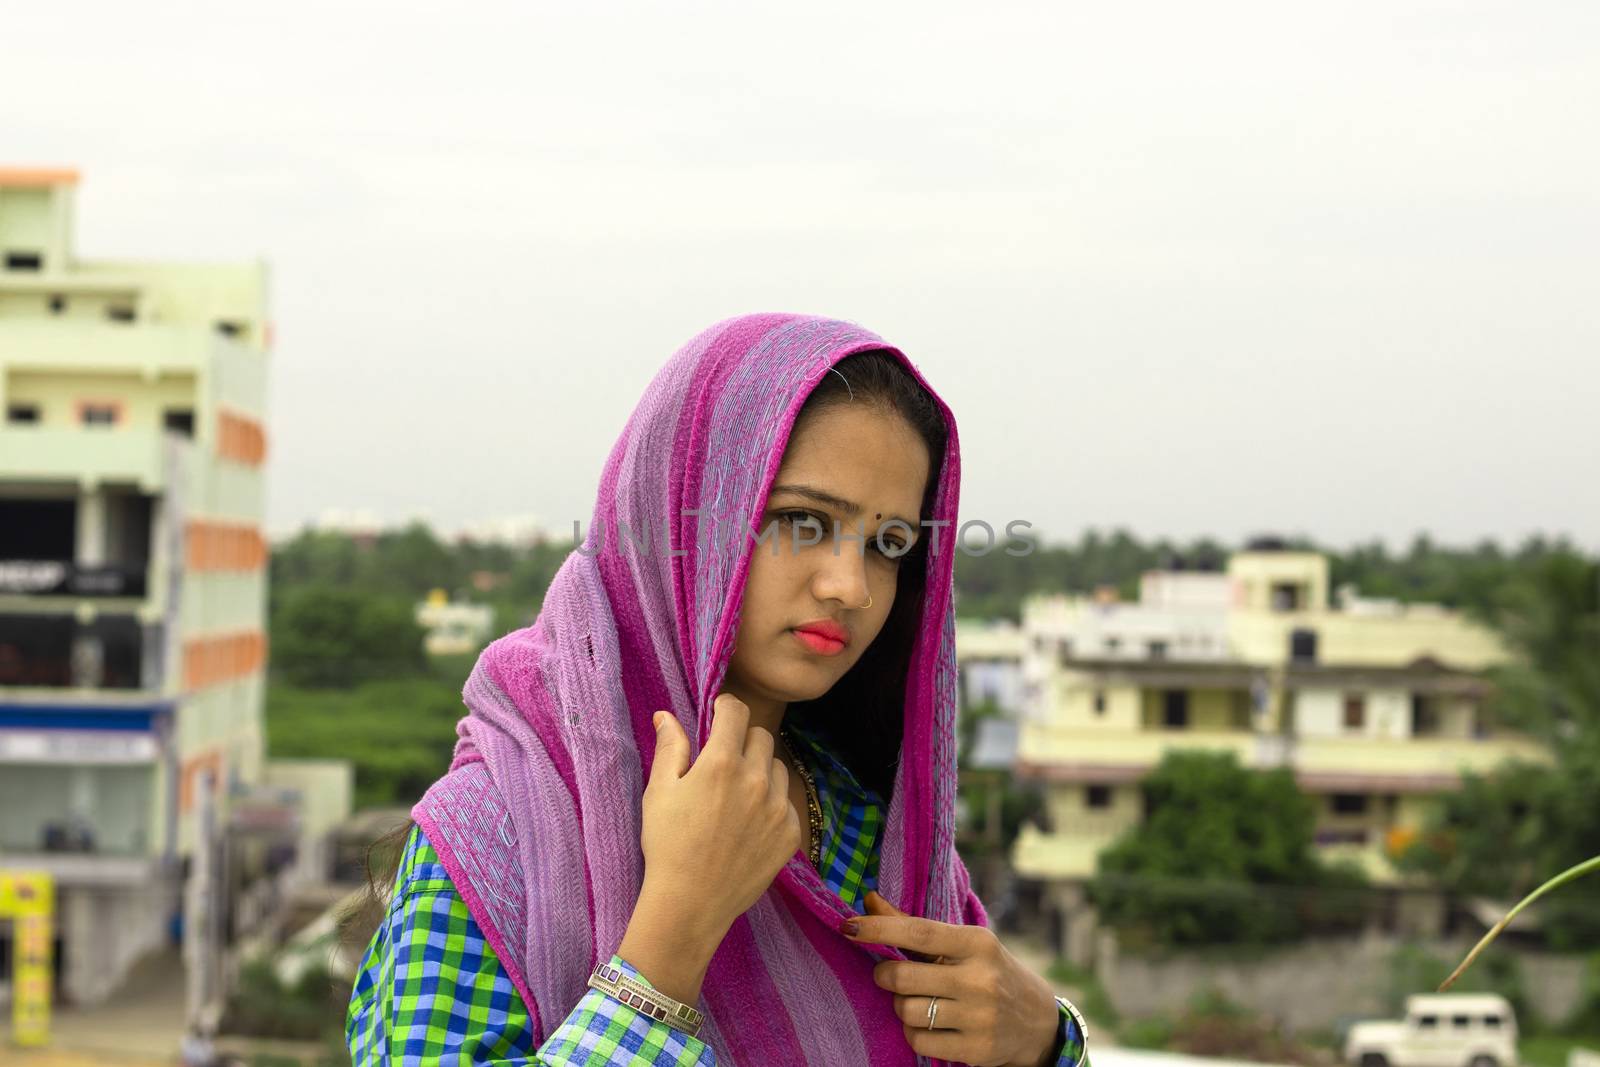 A young beautiful Hindu girl with a green shirt and a colorful scarf on the head by 9500102400